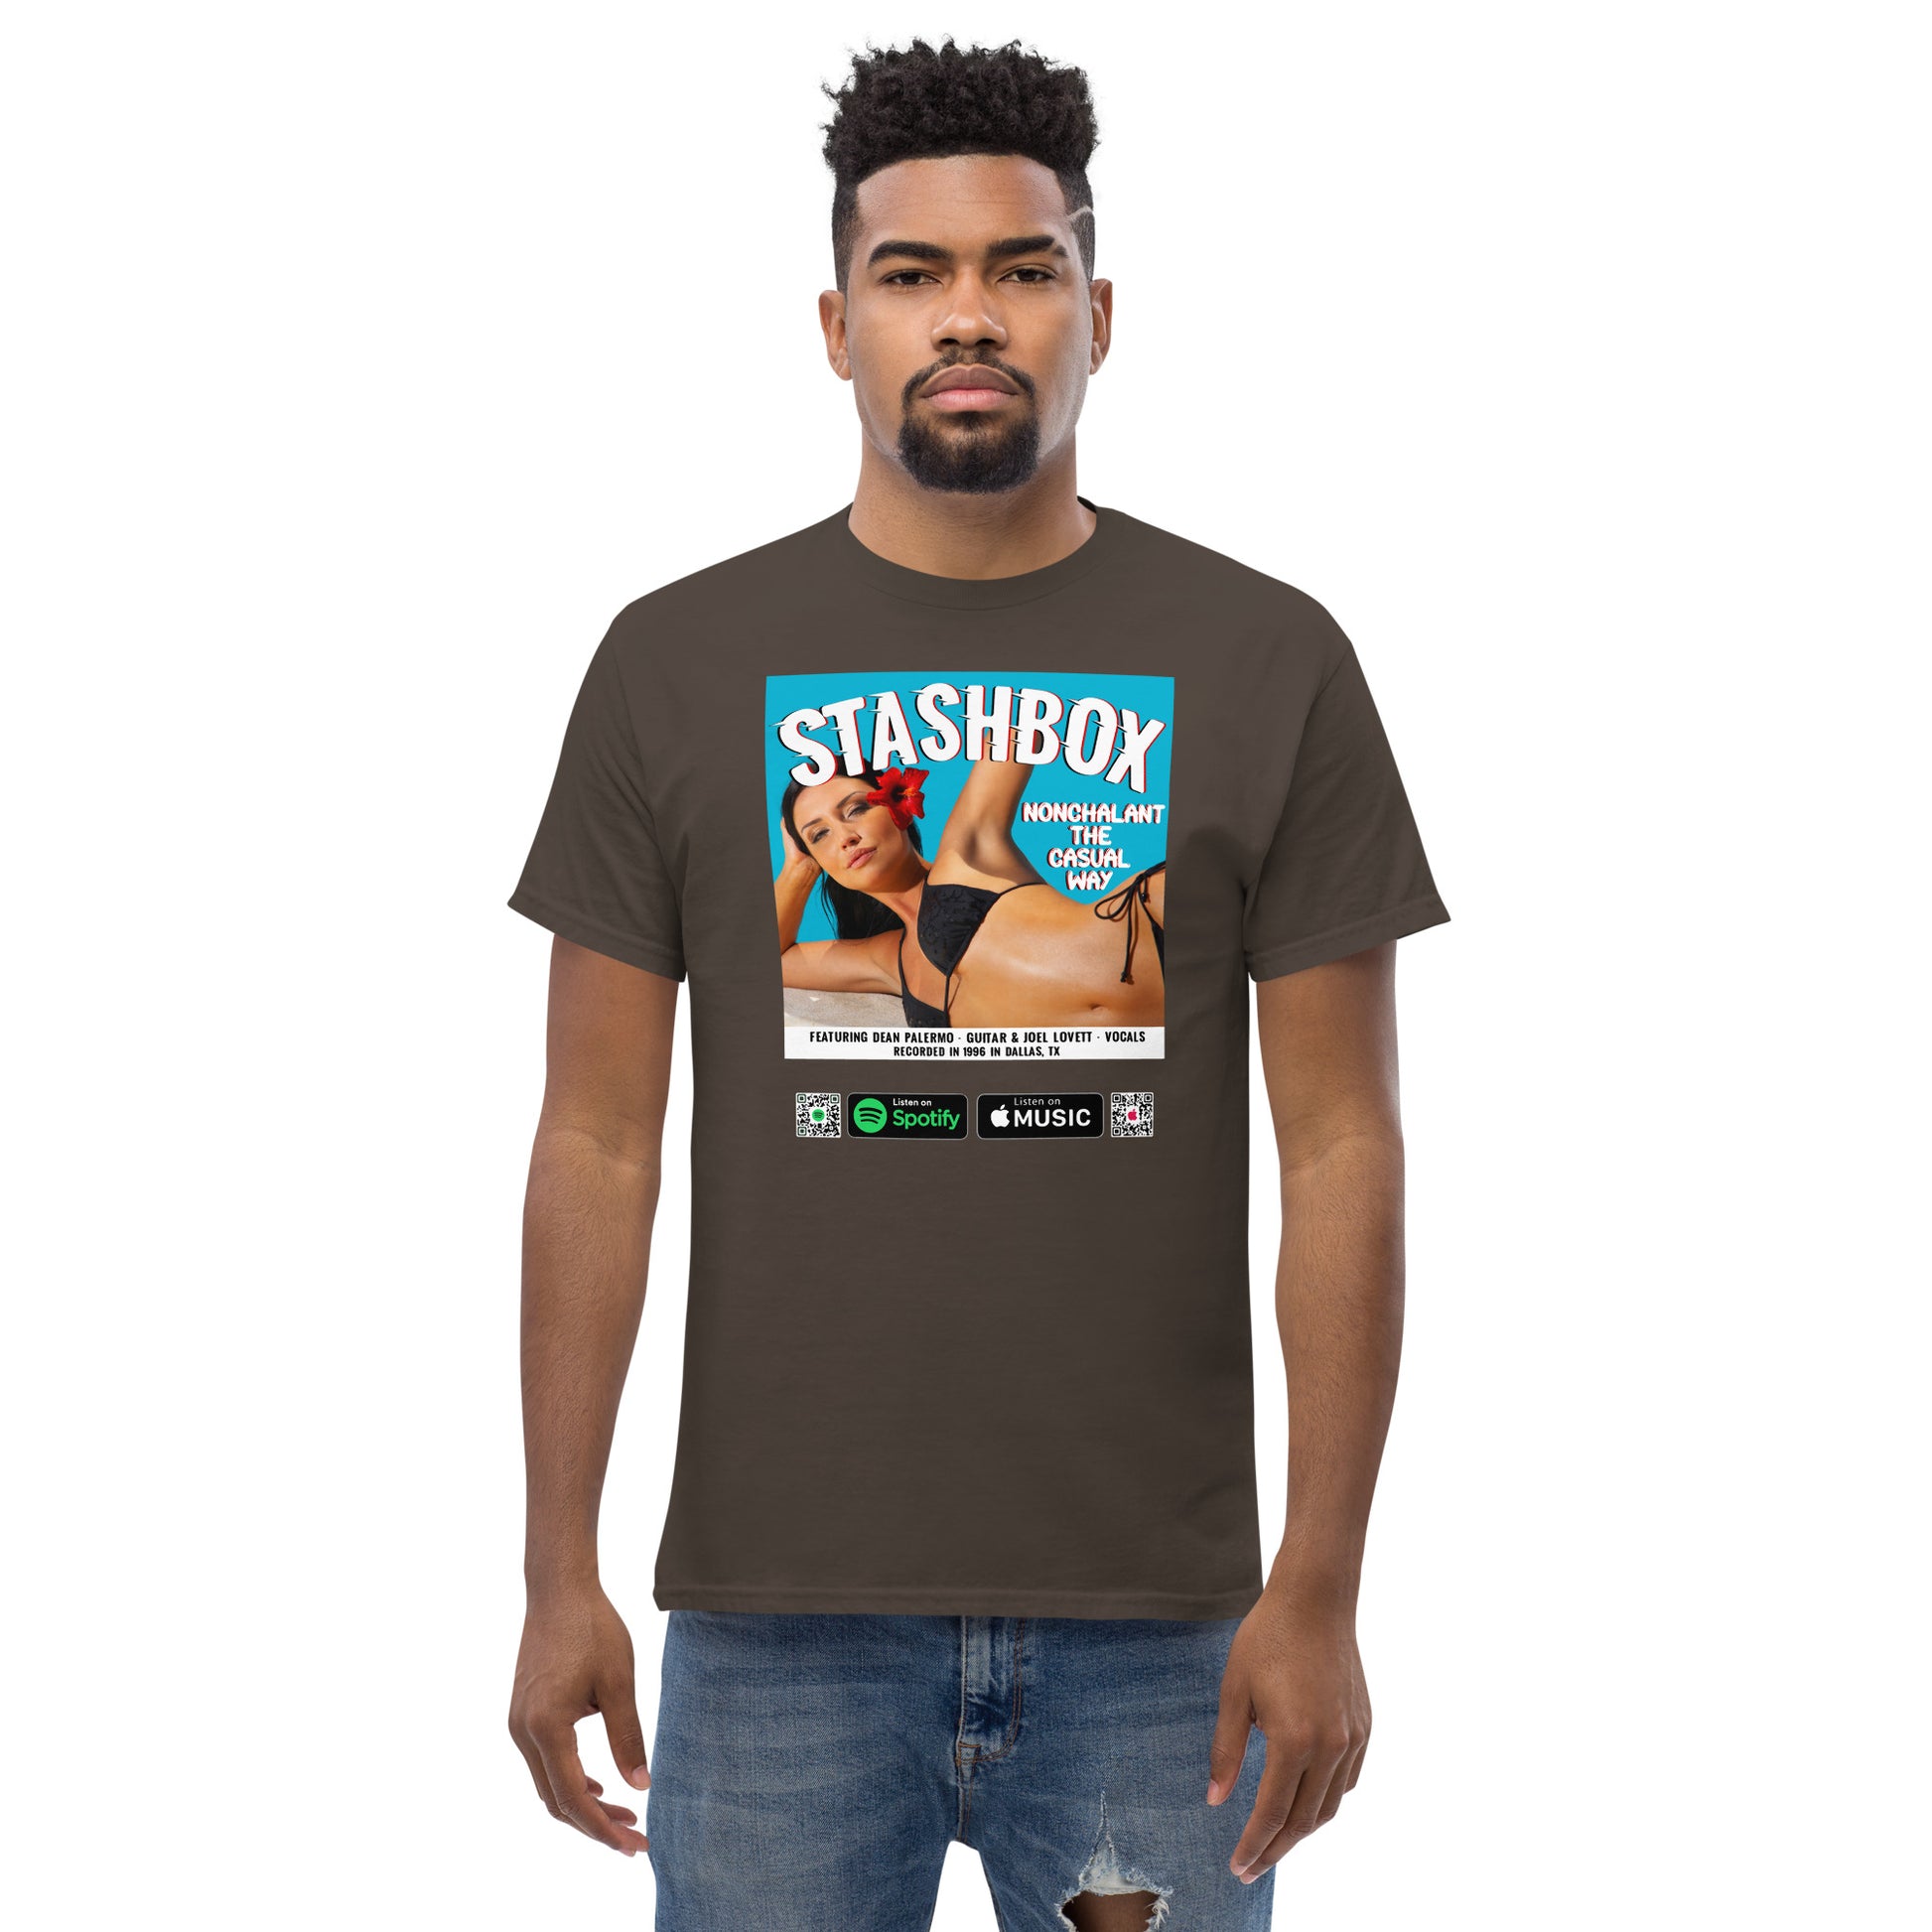 Immerse yourself in casual elegance with our Nonchalant In The Casual Way Men's Classic Tee, Design #024. Your fashion, your whimsical journey into effortless fashion, exclusively at Stashbox.ai.